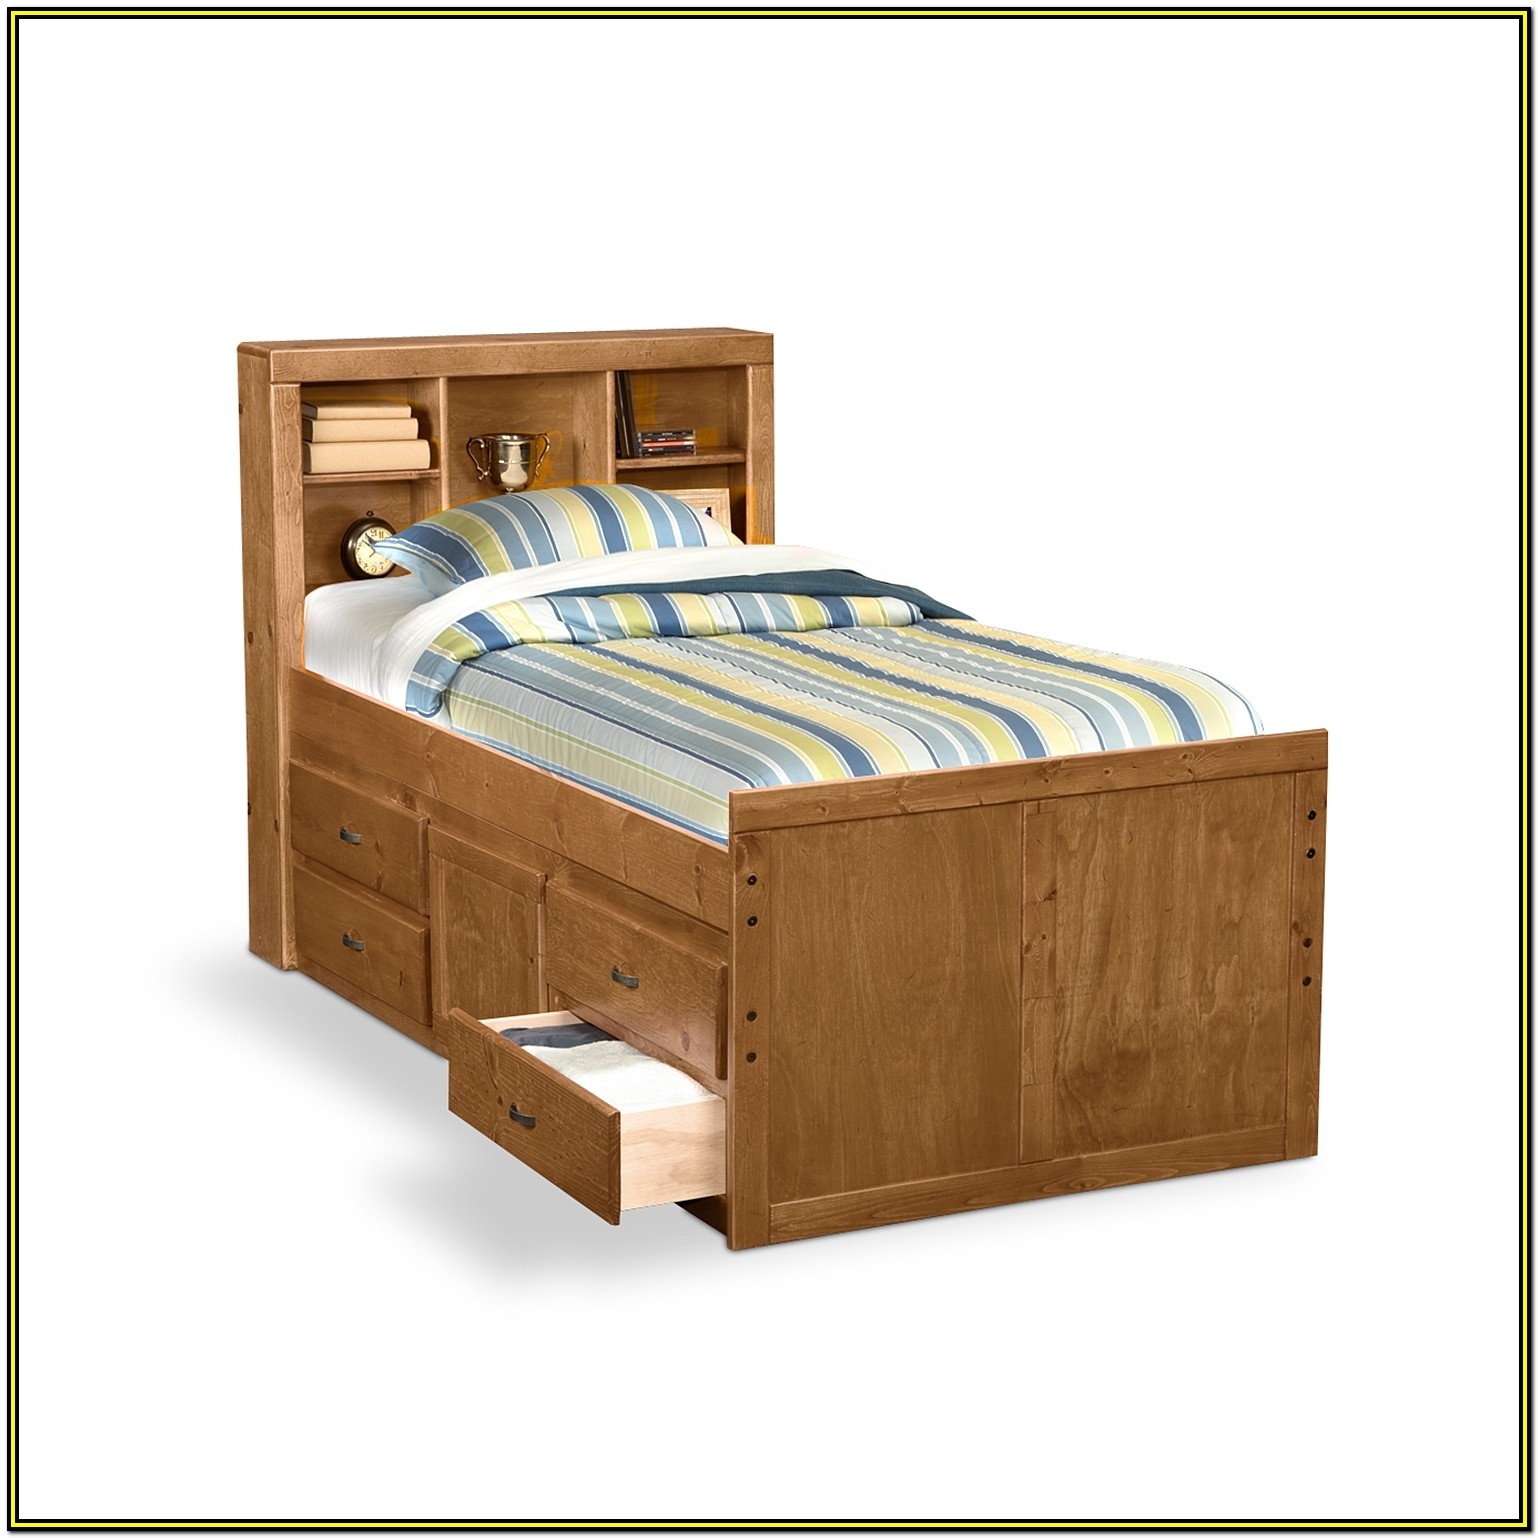 Bed With Drawers Underneath Visualhunt, Wooden Bed Frame With Drawers Underneath